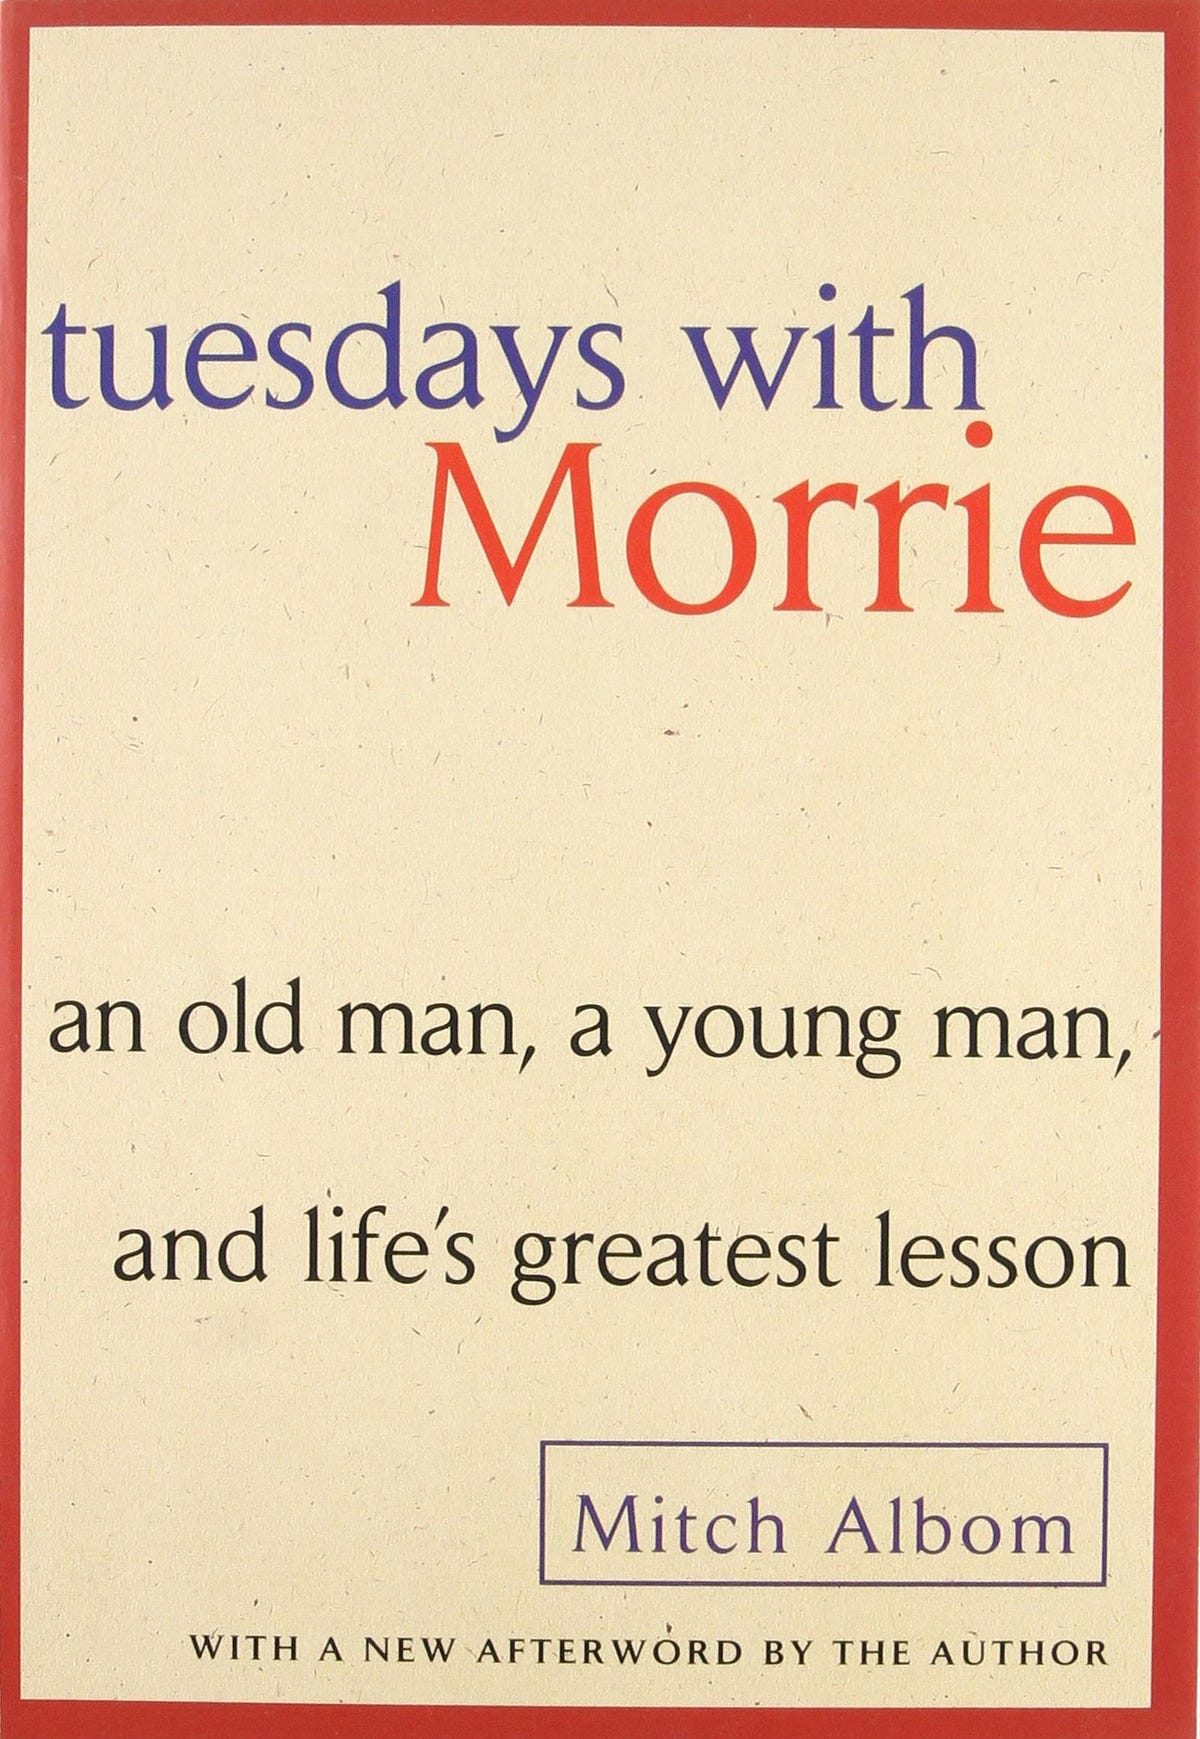 True story behind Tuesdays with Morrie: Dying man held weekly 'alive  funerals' for himself